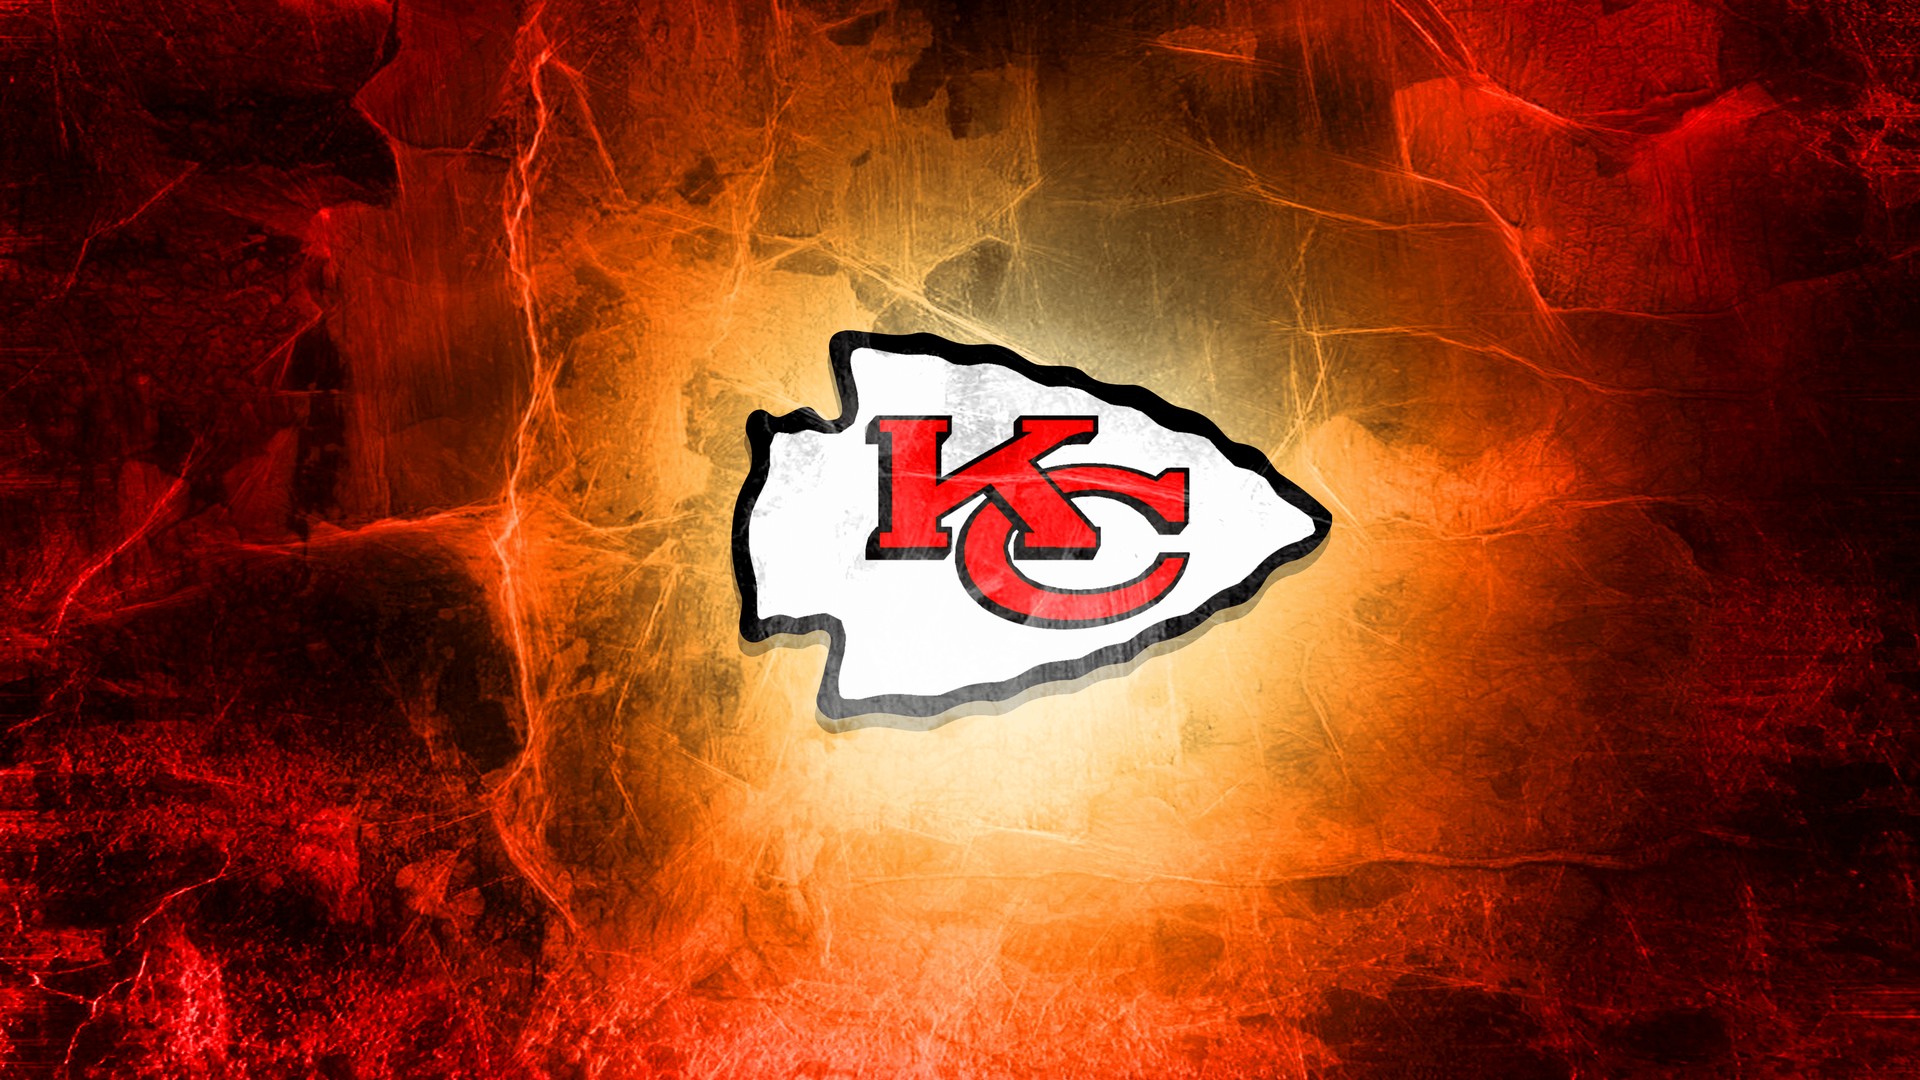 HD Backgrounds Kansas City Chiefs With Resolution 1920X1080 pixel. You can make this wallpaper for your Mac or Windows Desktop Background, iPhone, Android or Tablet and another Smartphone device for free